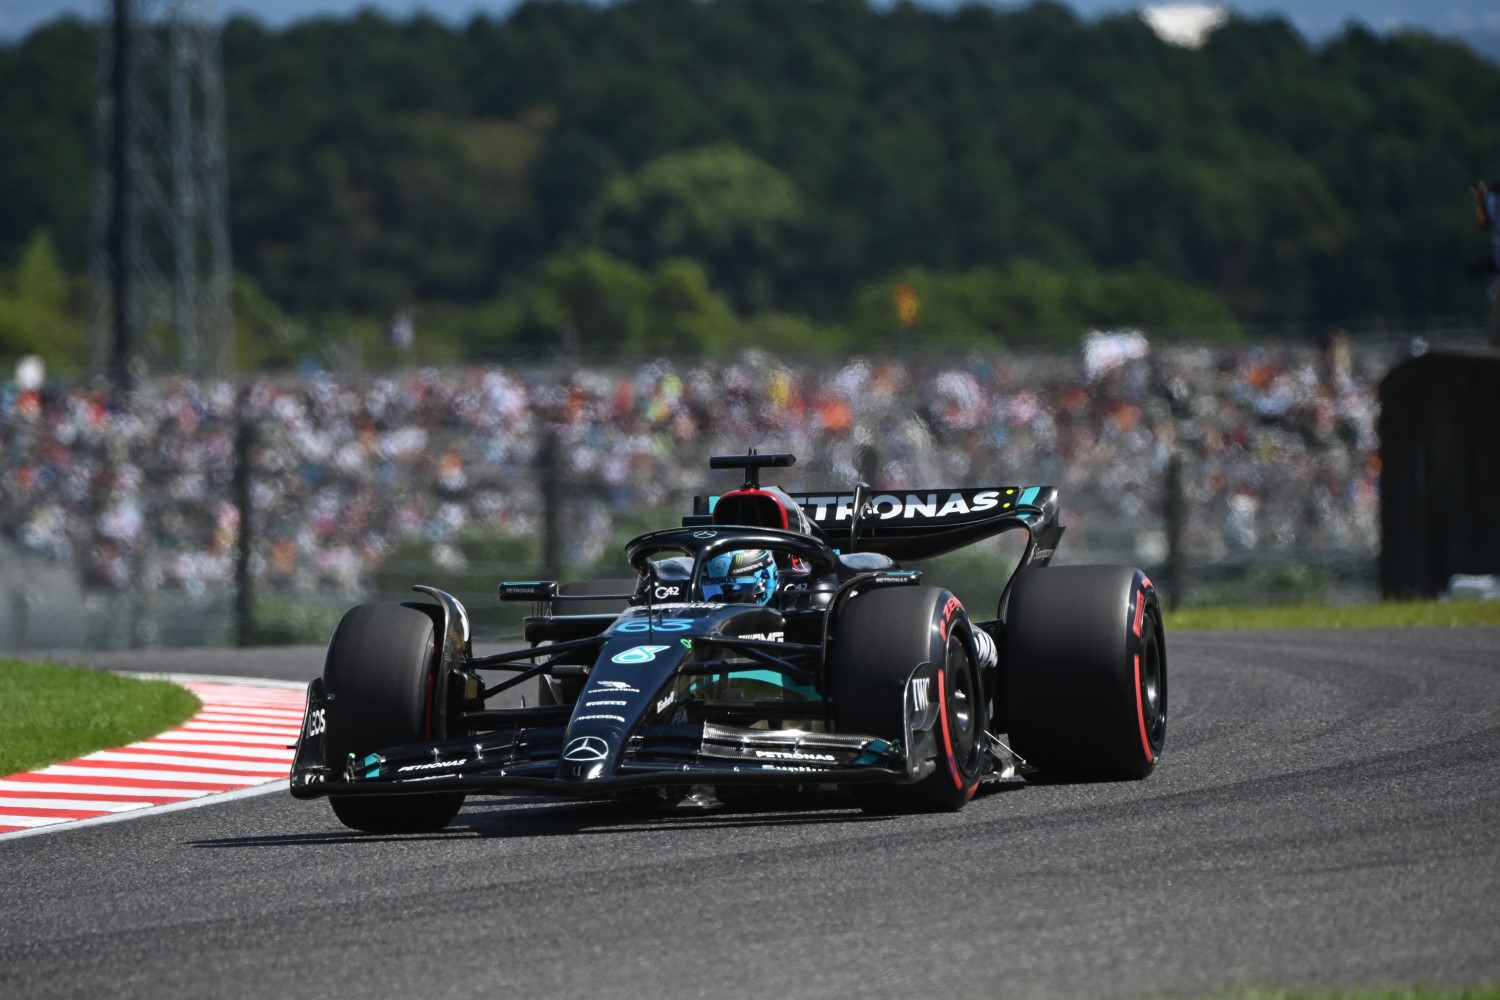 George Russell, Mercedes F1 W14 during the Japanese GP at Suzuka on Saturday September 23, 2023 in Suzuka, Japan. (Photo by Mark Sutton / LAT Images)